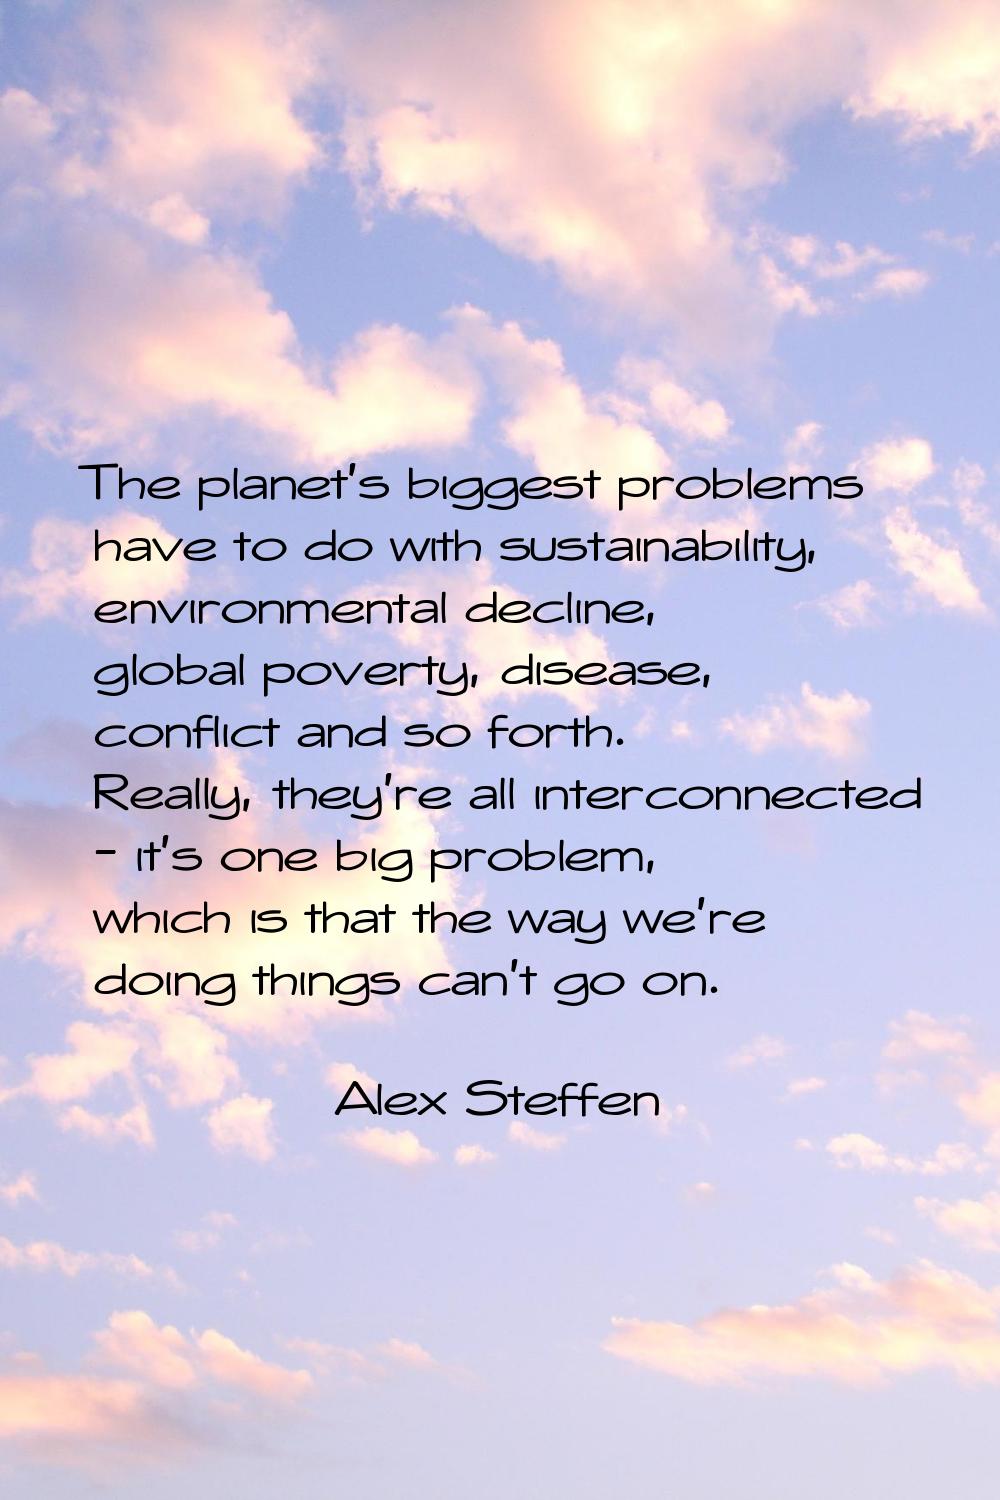 The planet's biggest problems have to do with sustainability, environmental decline, global poverty